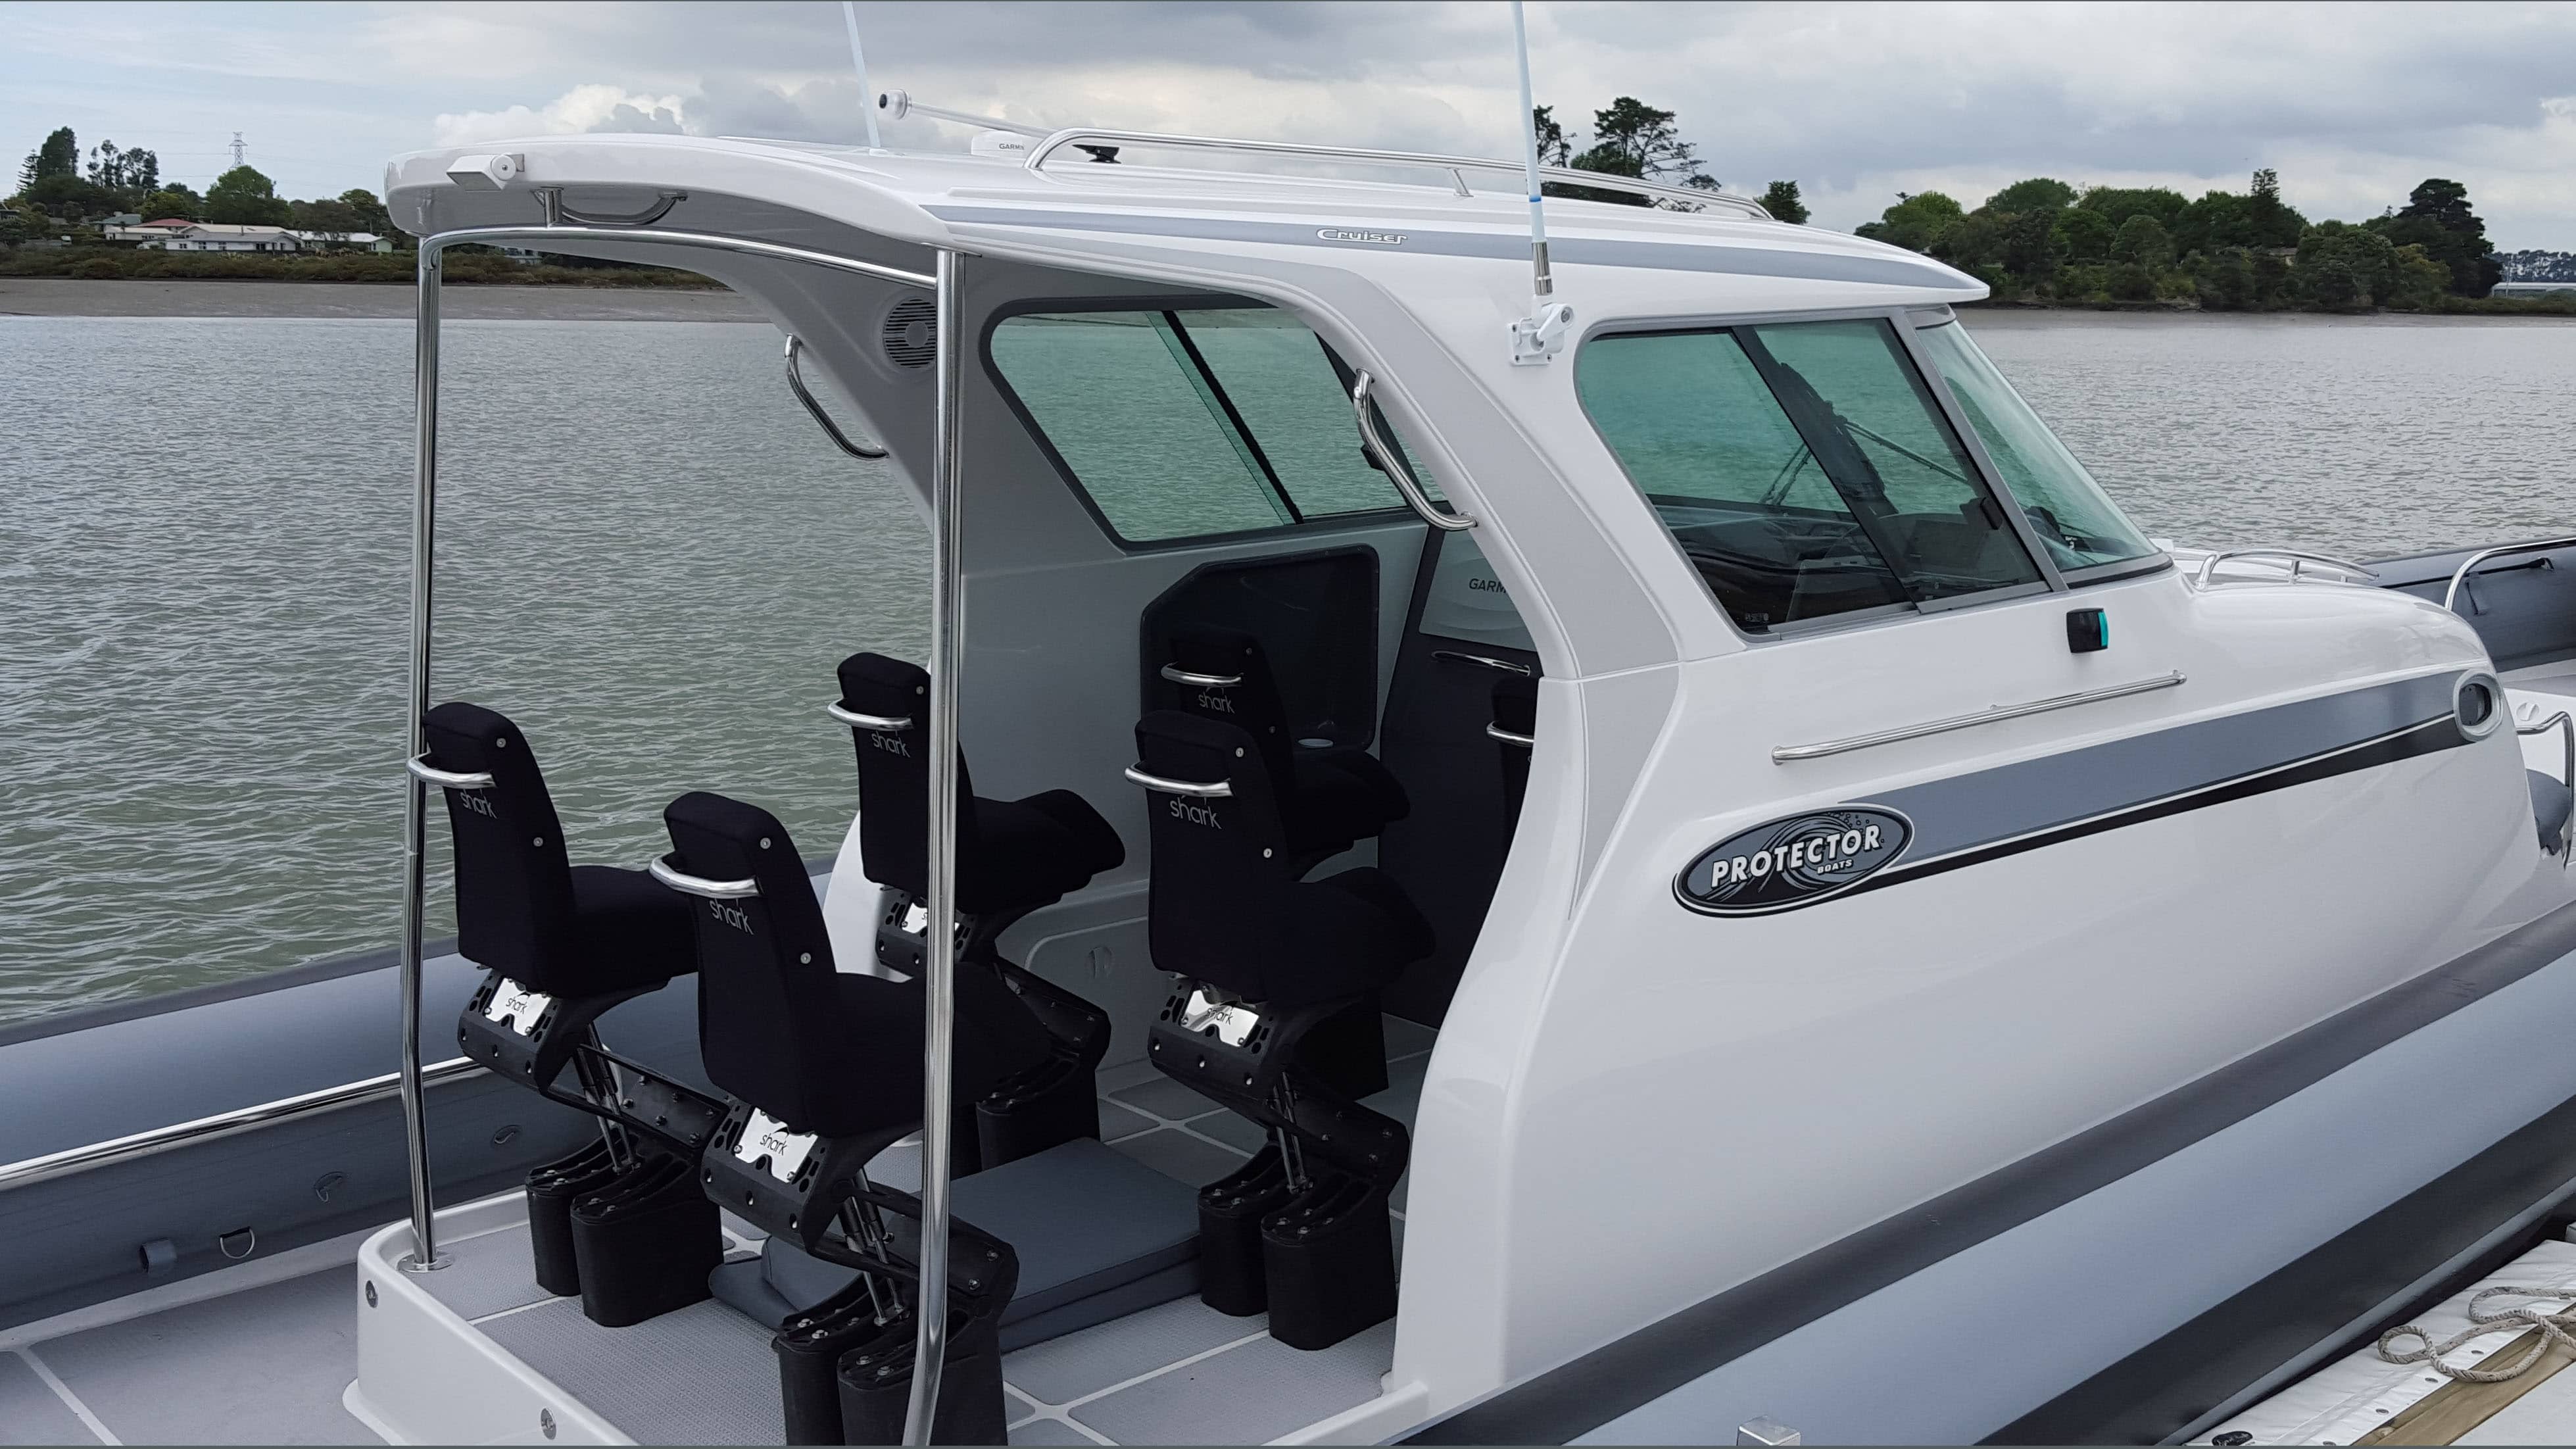 Photo of Seats on Boat wrapped with Neoprene sourced from Texspec